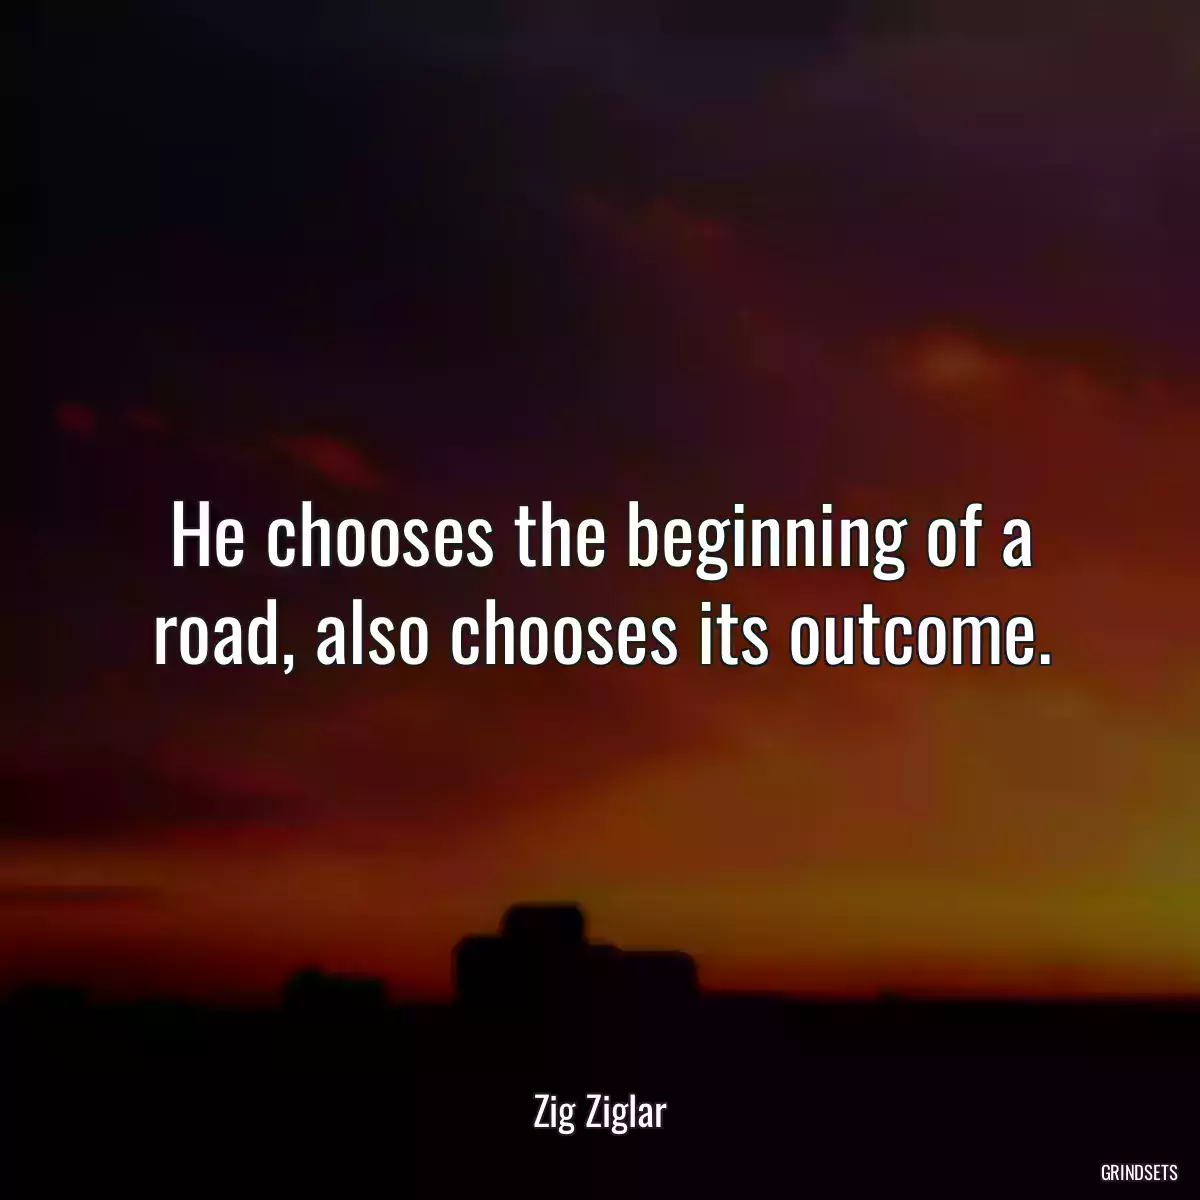 He chooses the beginning of a road, also chooses its outcome.